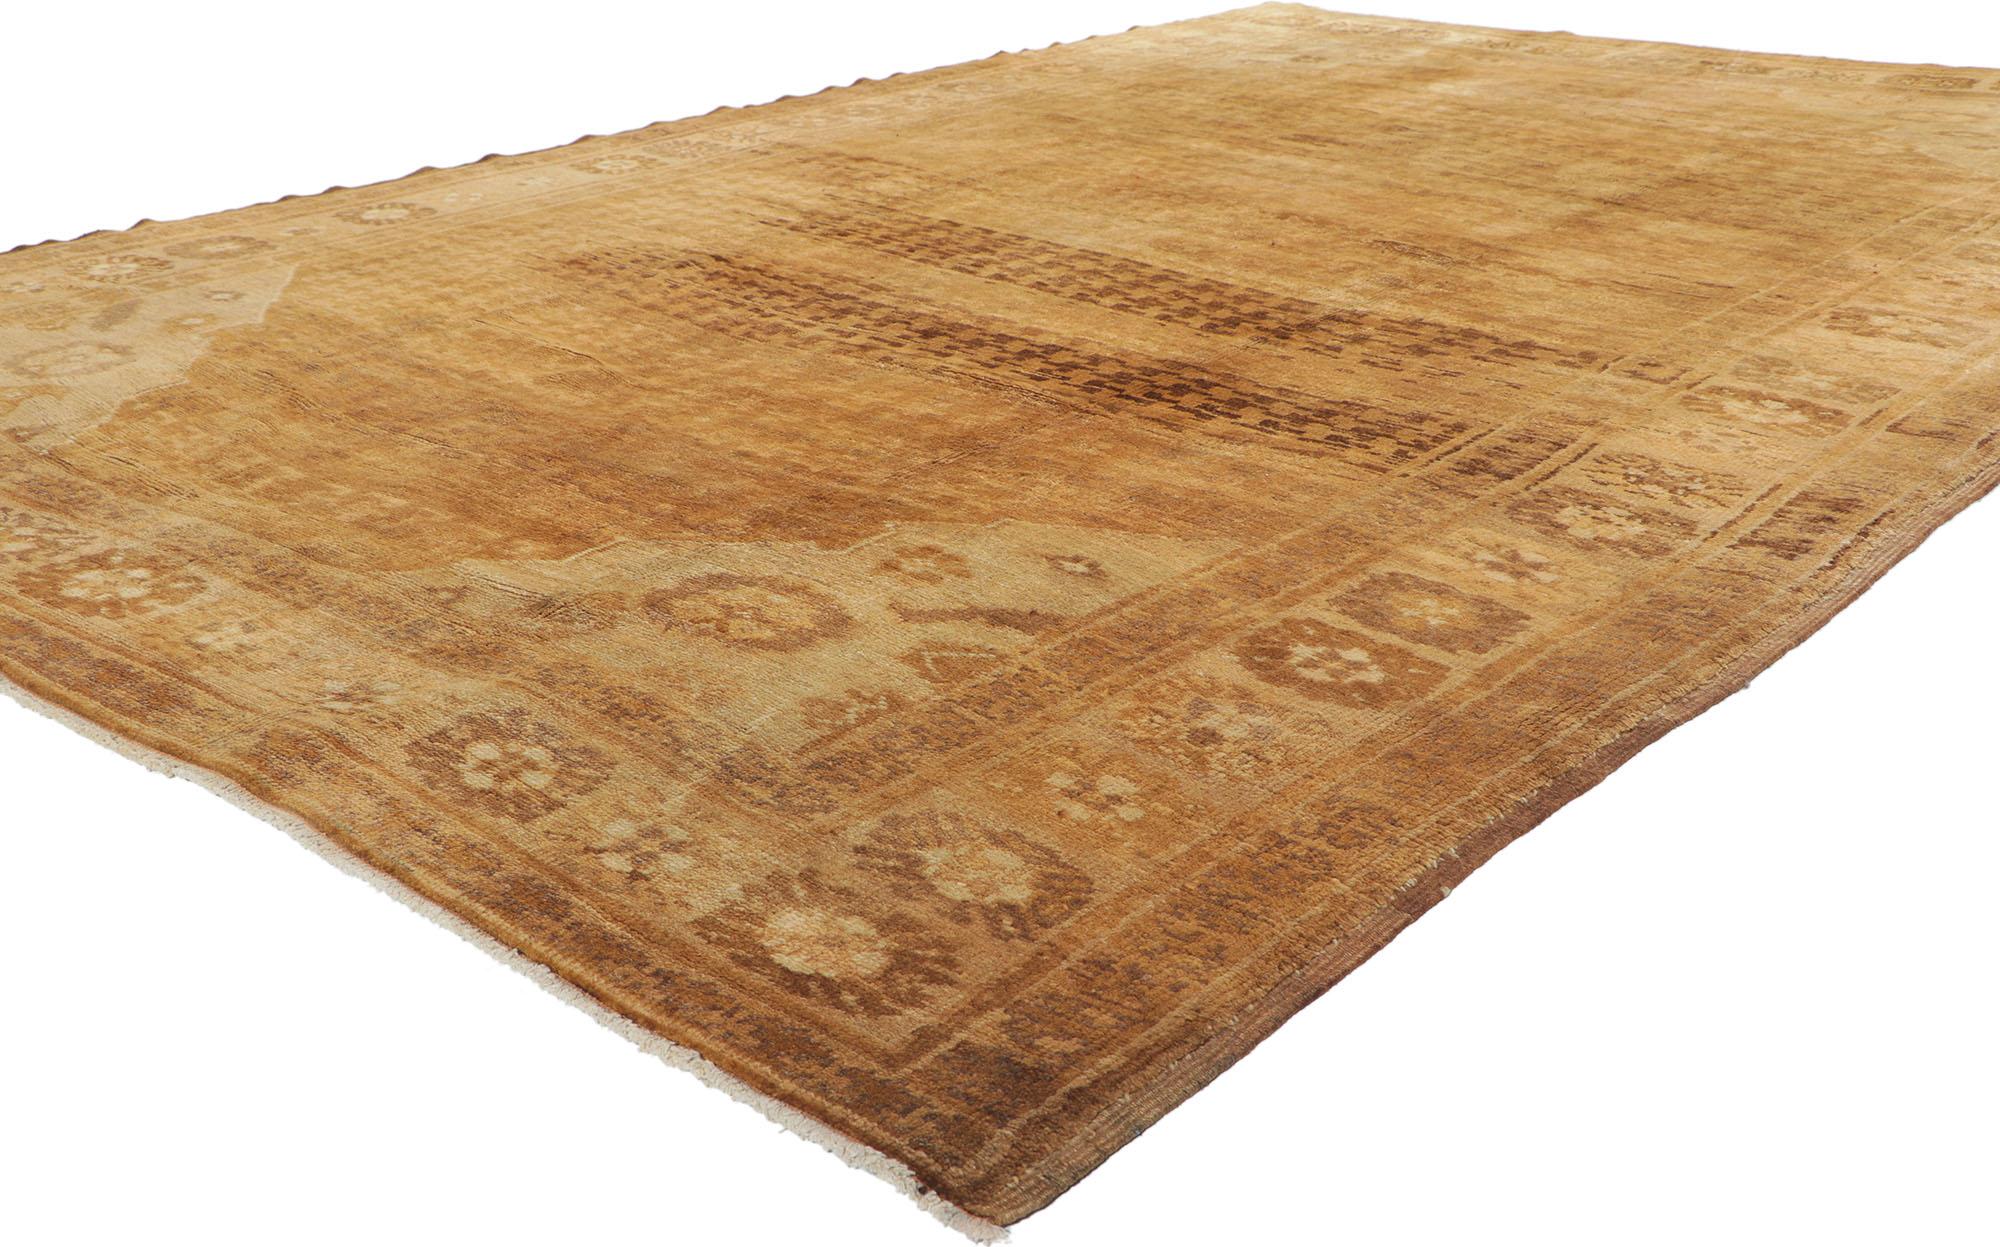 50388 Antique Turkish Kars Oushak Rug with Mid-Century Modern Style 06'10 x 10'03. With its luminous warm hues and beguiling beauty, this hand-knotted wool antique Turkish Kars rug will take on a curated lived-in look that feels timeless while